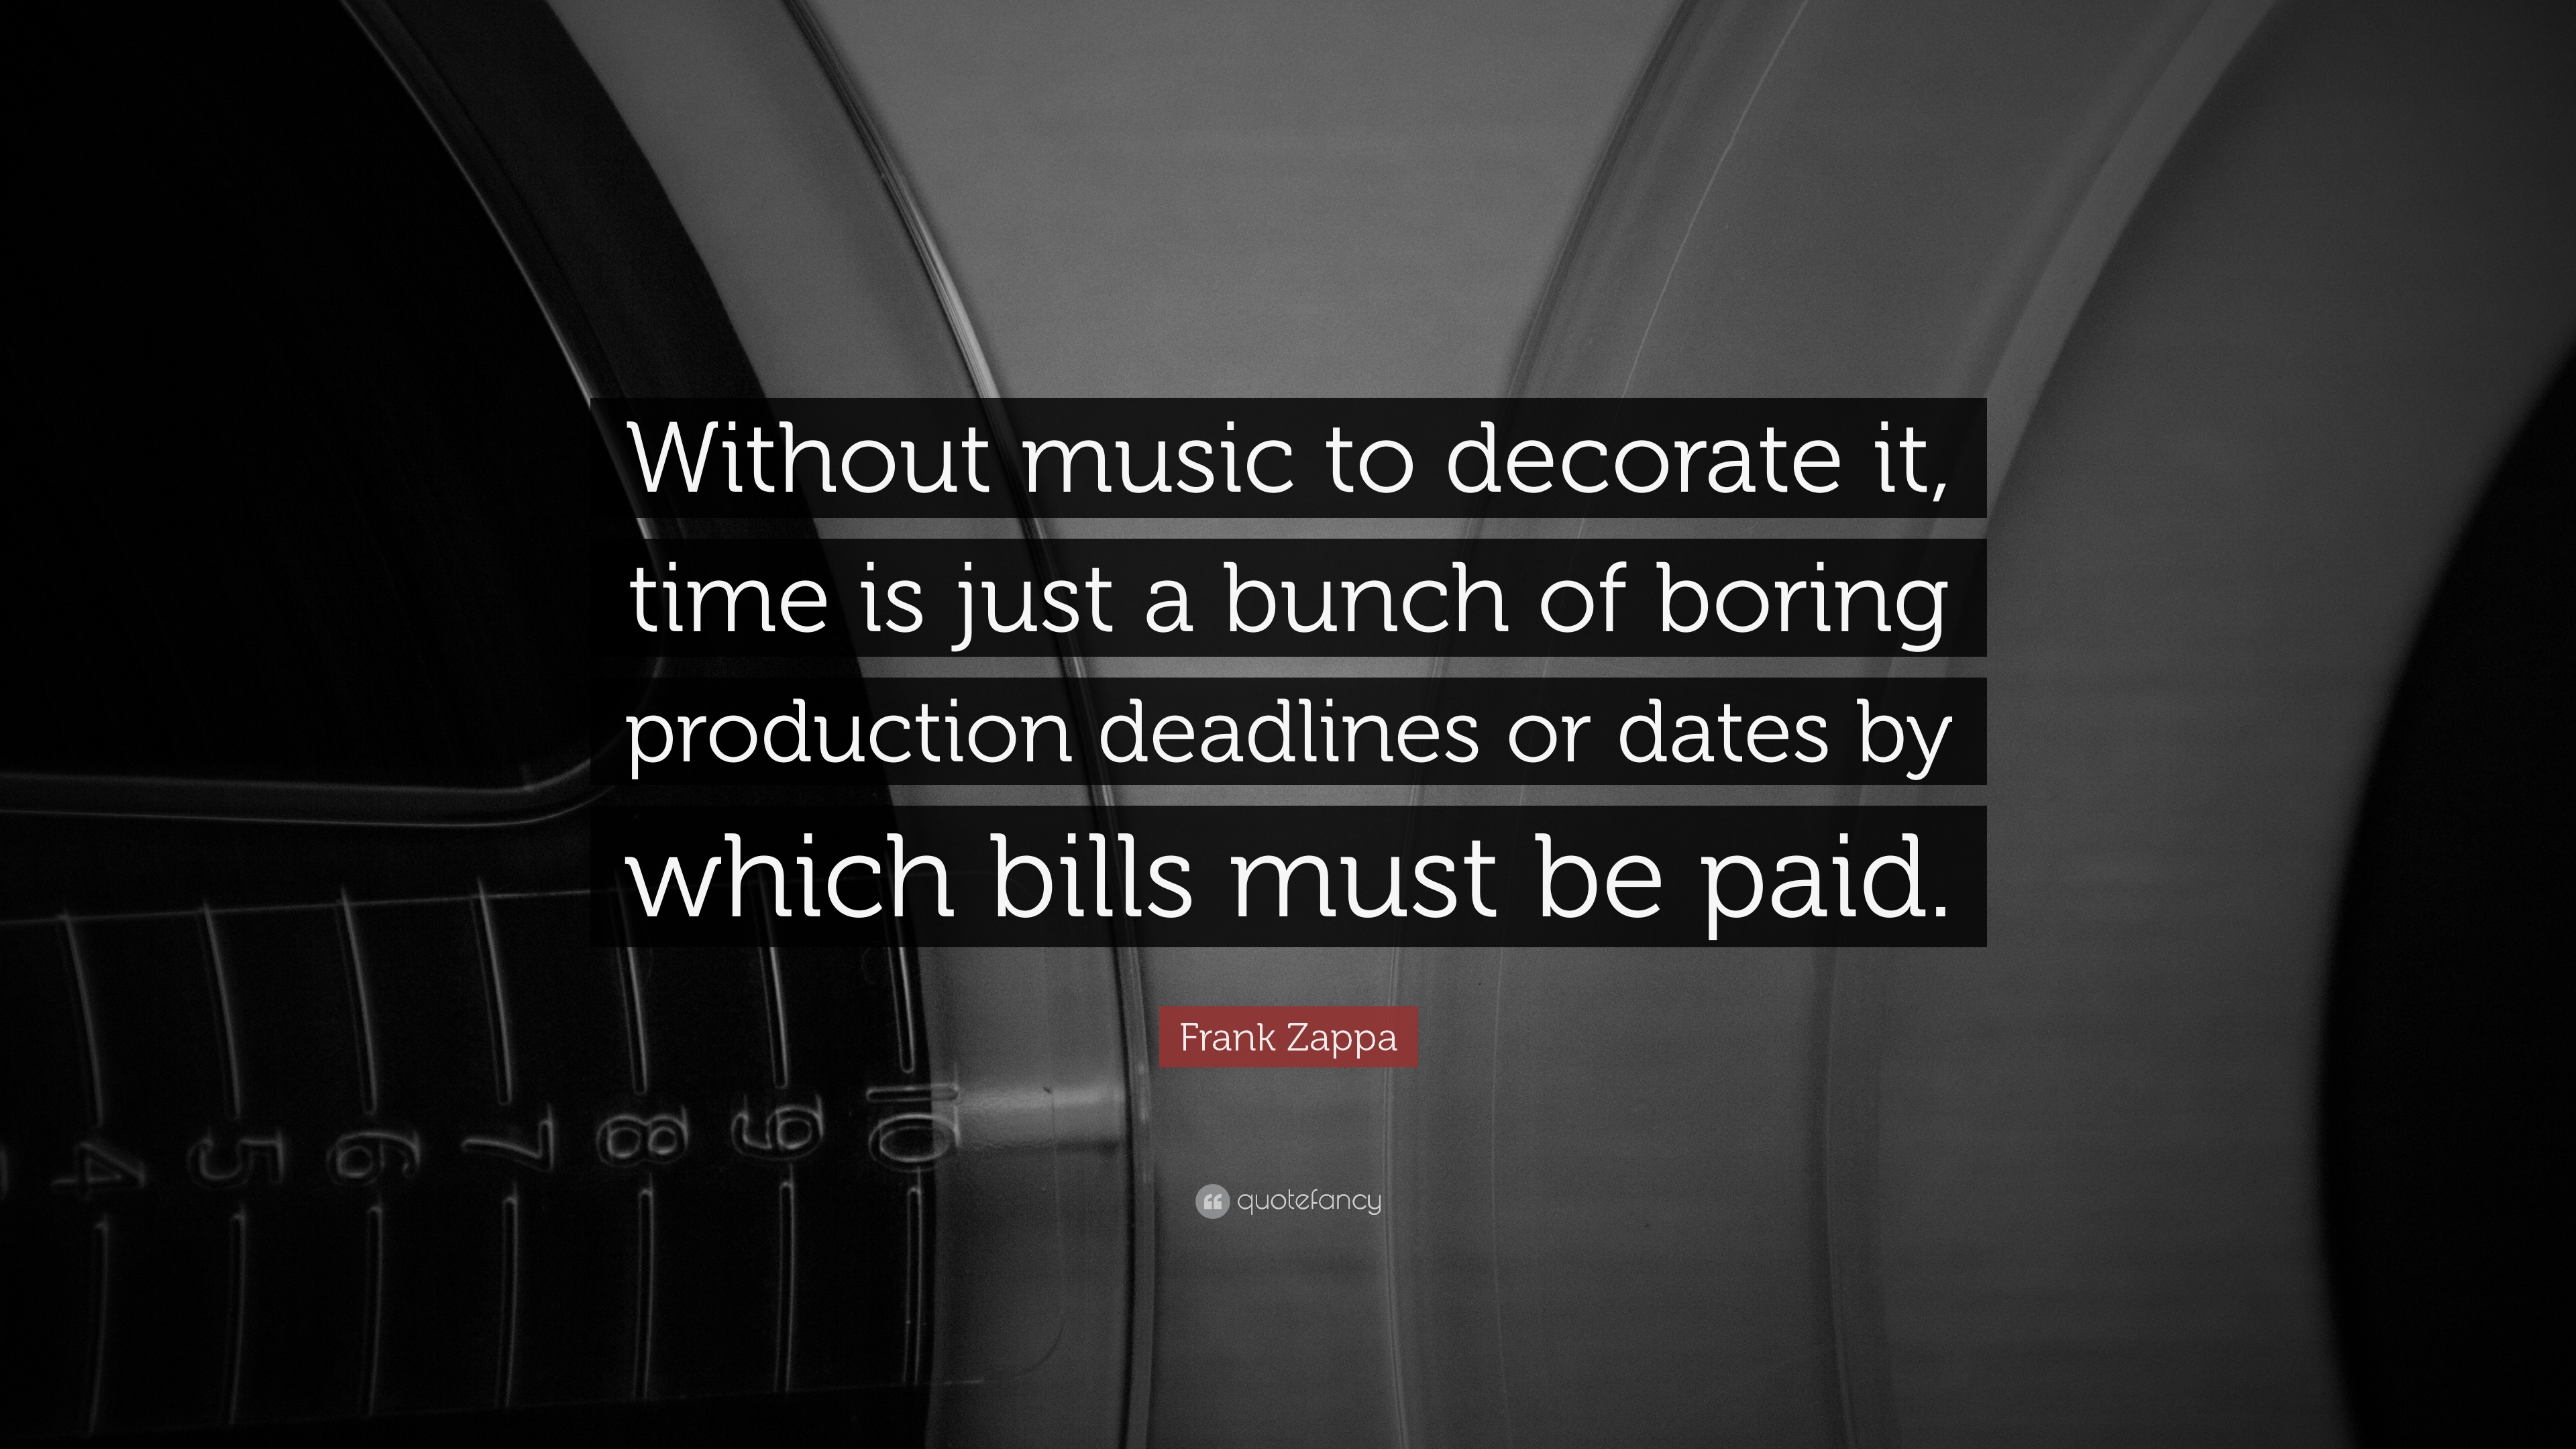 Music Quotes (40 wallpapers) - Quotefancy